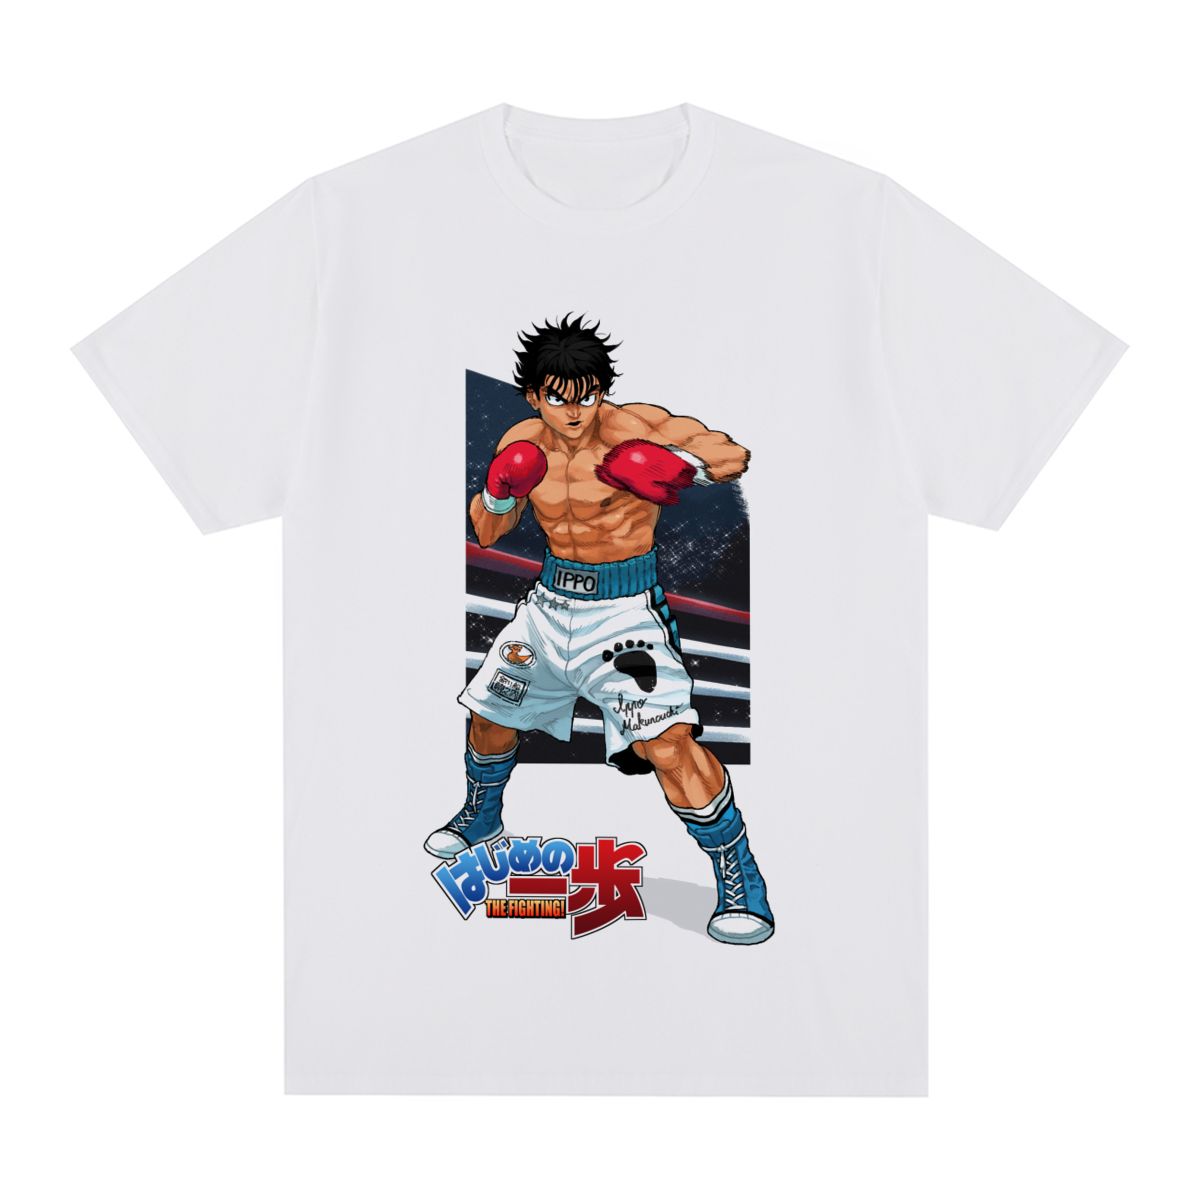 In the Ring T-Shirt